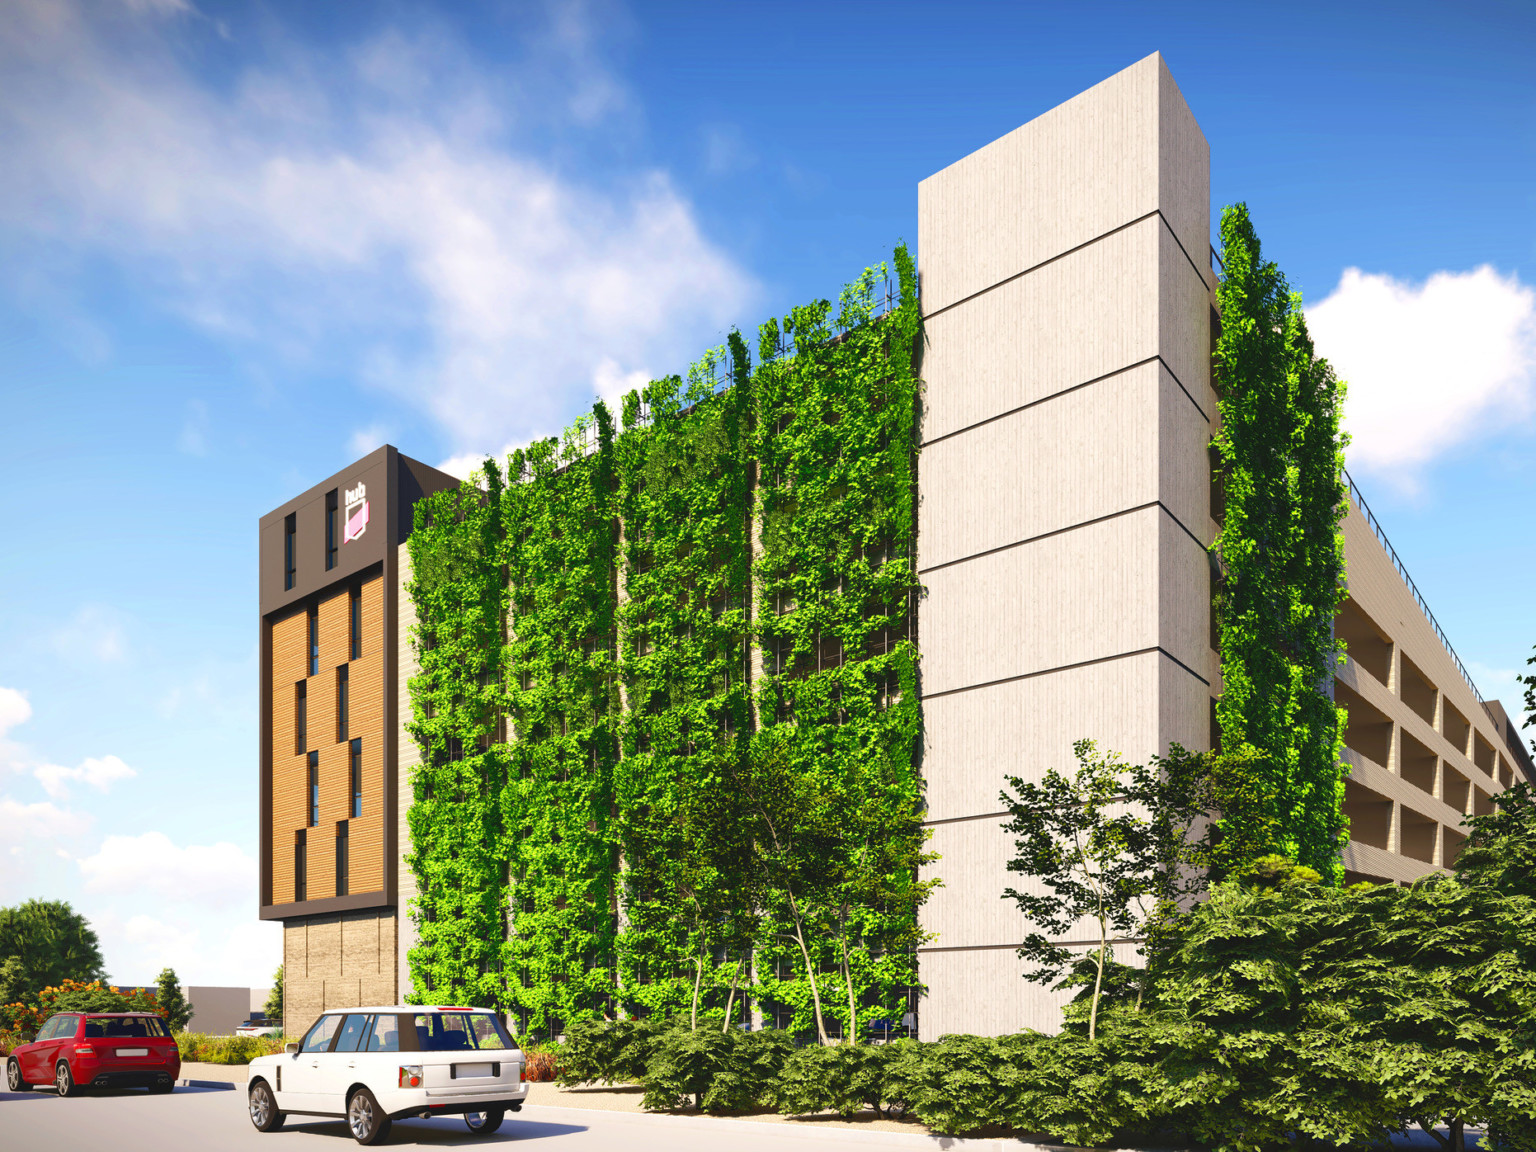 Exterior of multistory parking garage with HUB sign on left corner and green living wall along front wall and to side